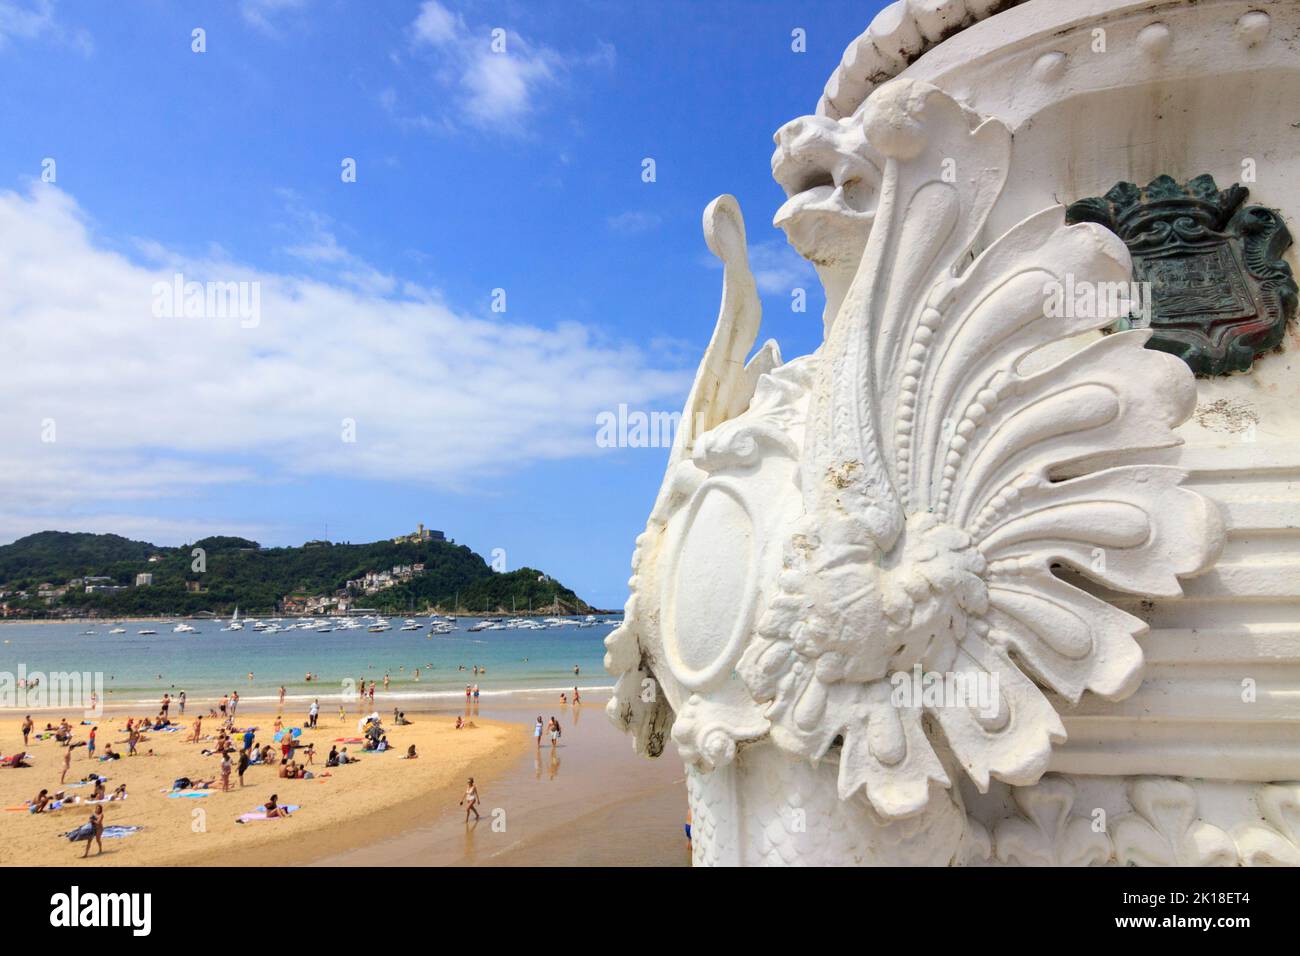 San Sebastian, Basque Country, Spain : Detail of the iconic lampposts at the promenade along la Concha beach with beach-goers in background. Stock Photo